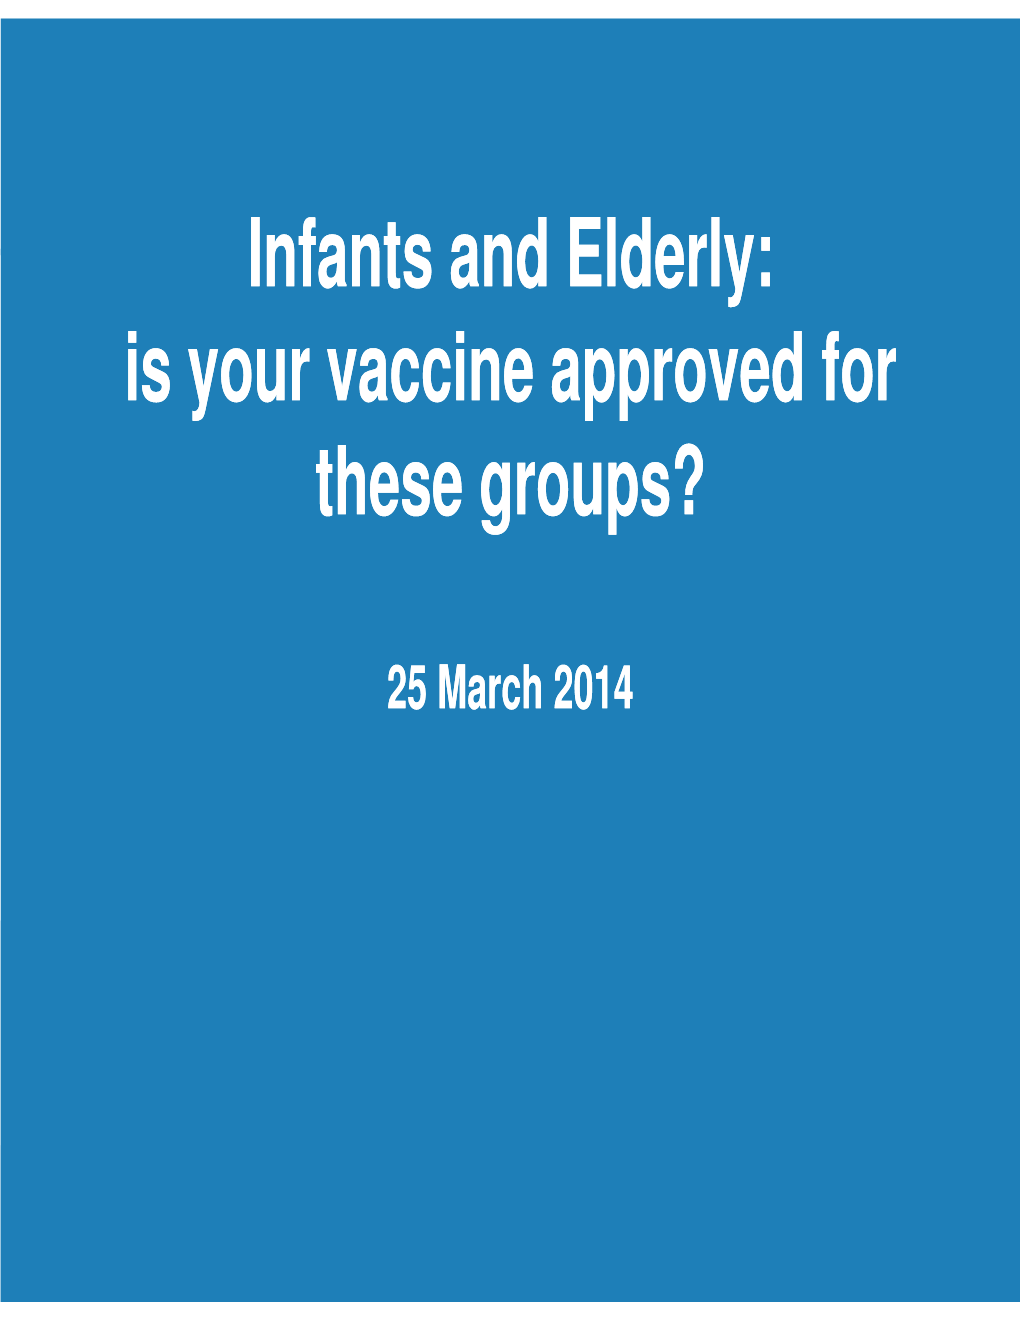 Infants and Elderly: Is Your Vaccine Approved for These Groups?